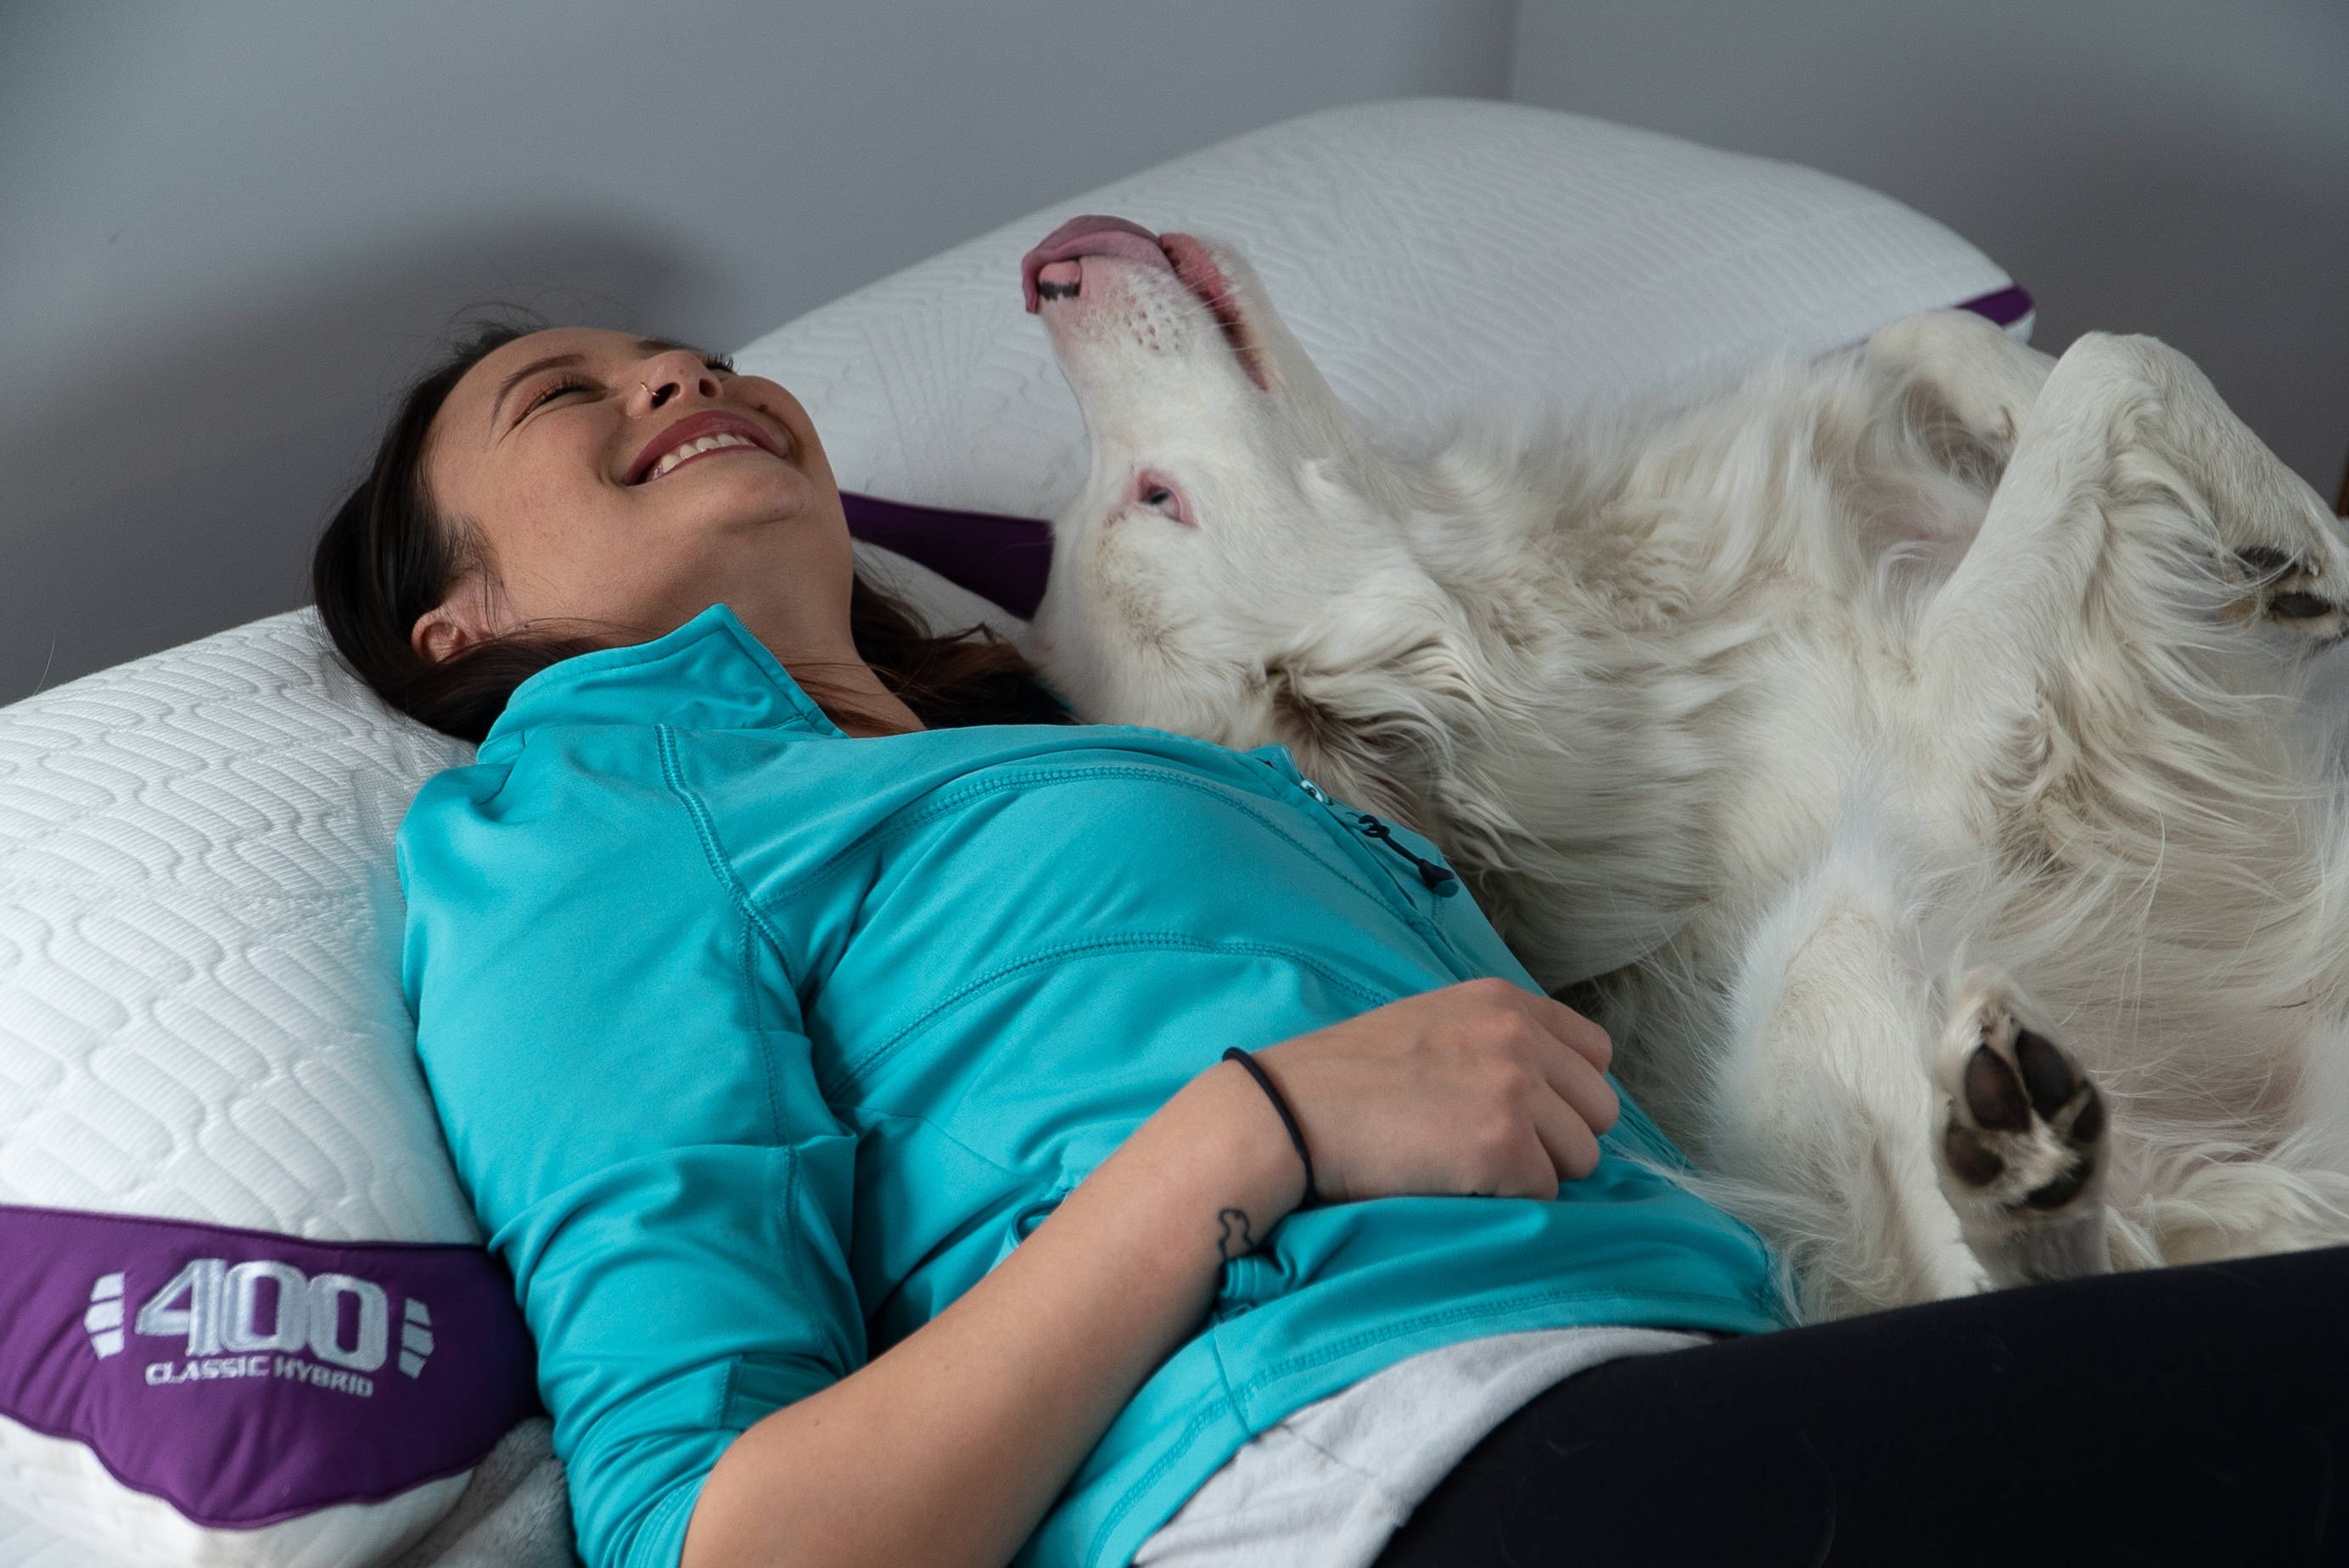 What is Nordic Chill. woman with dog on 400 cooling pillow and advanced memory foam mattress